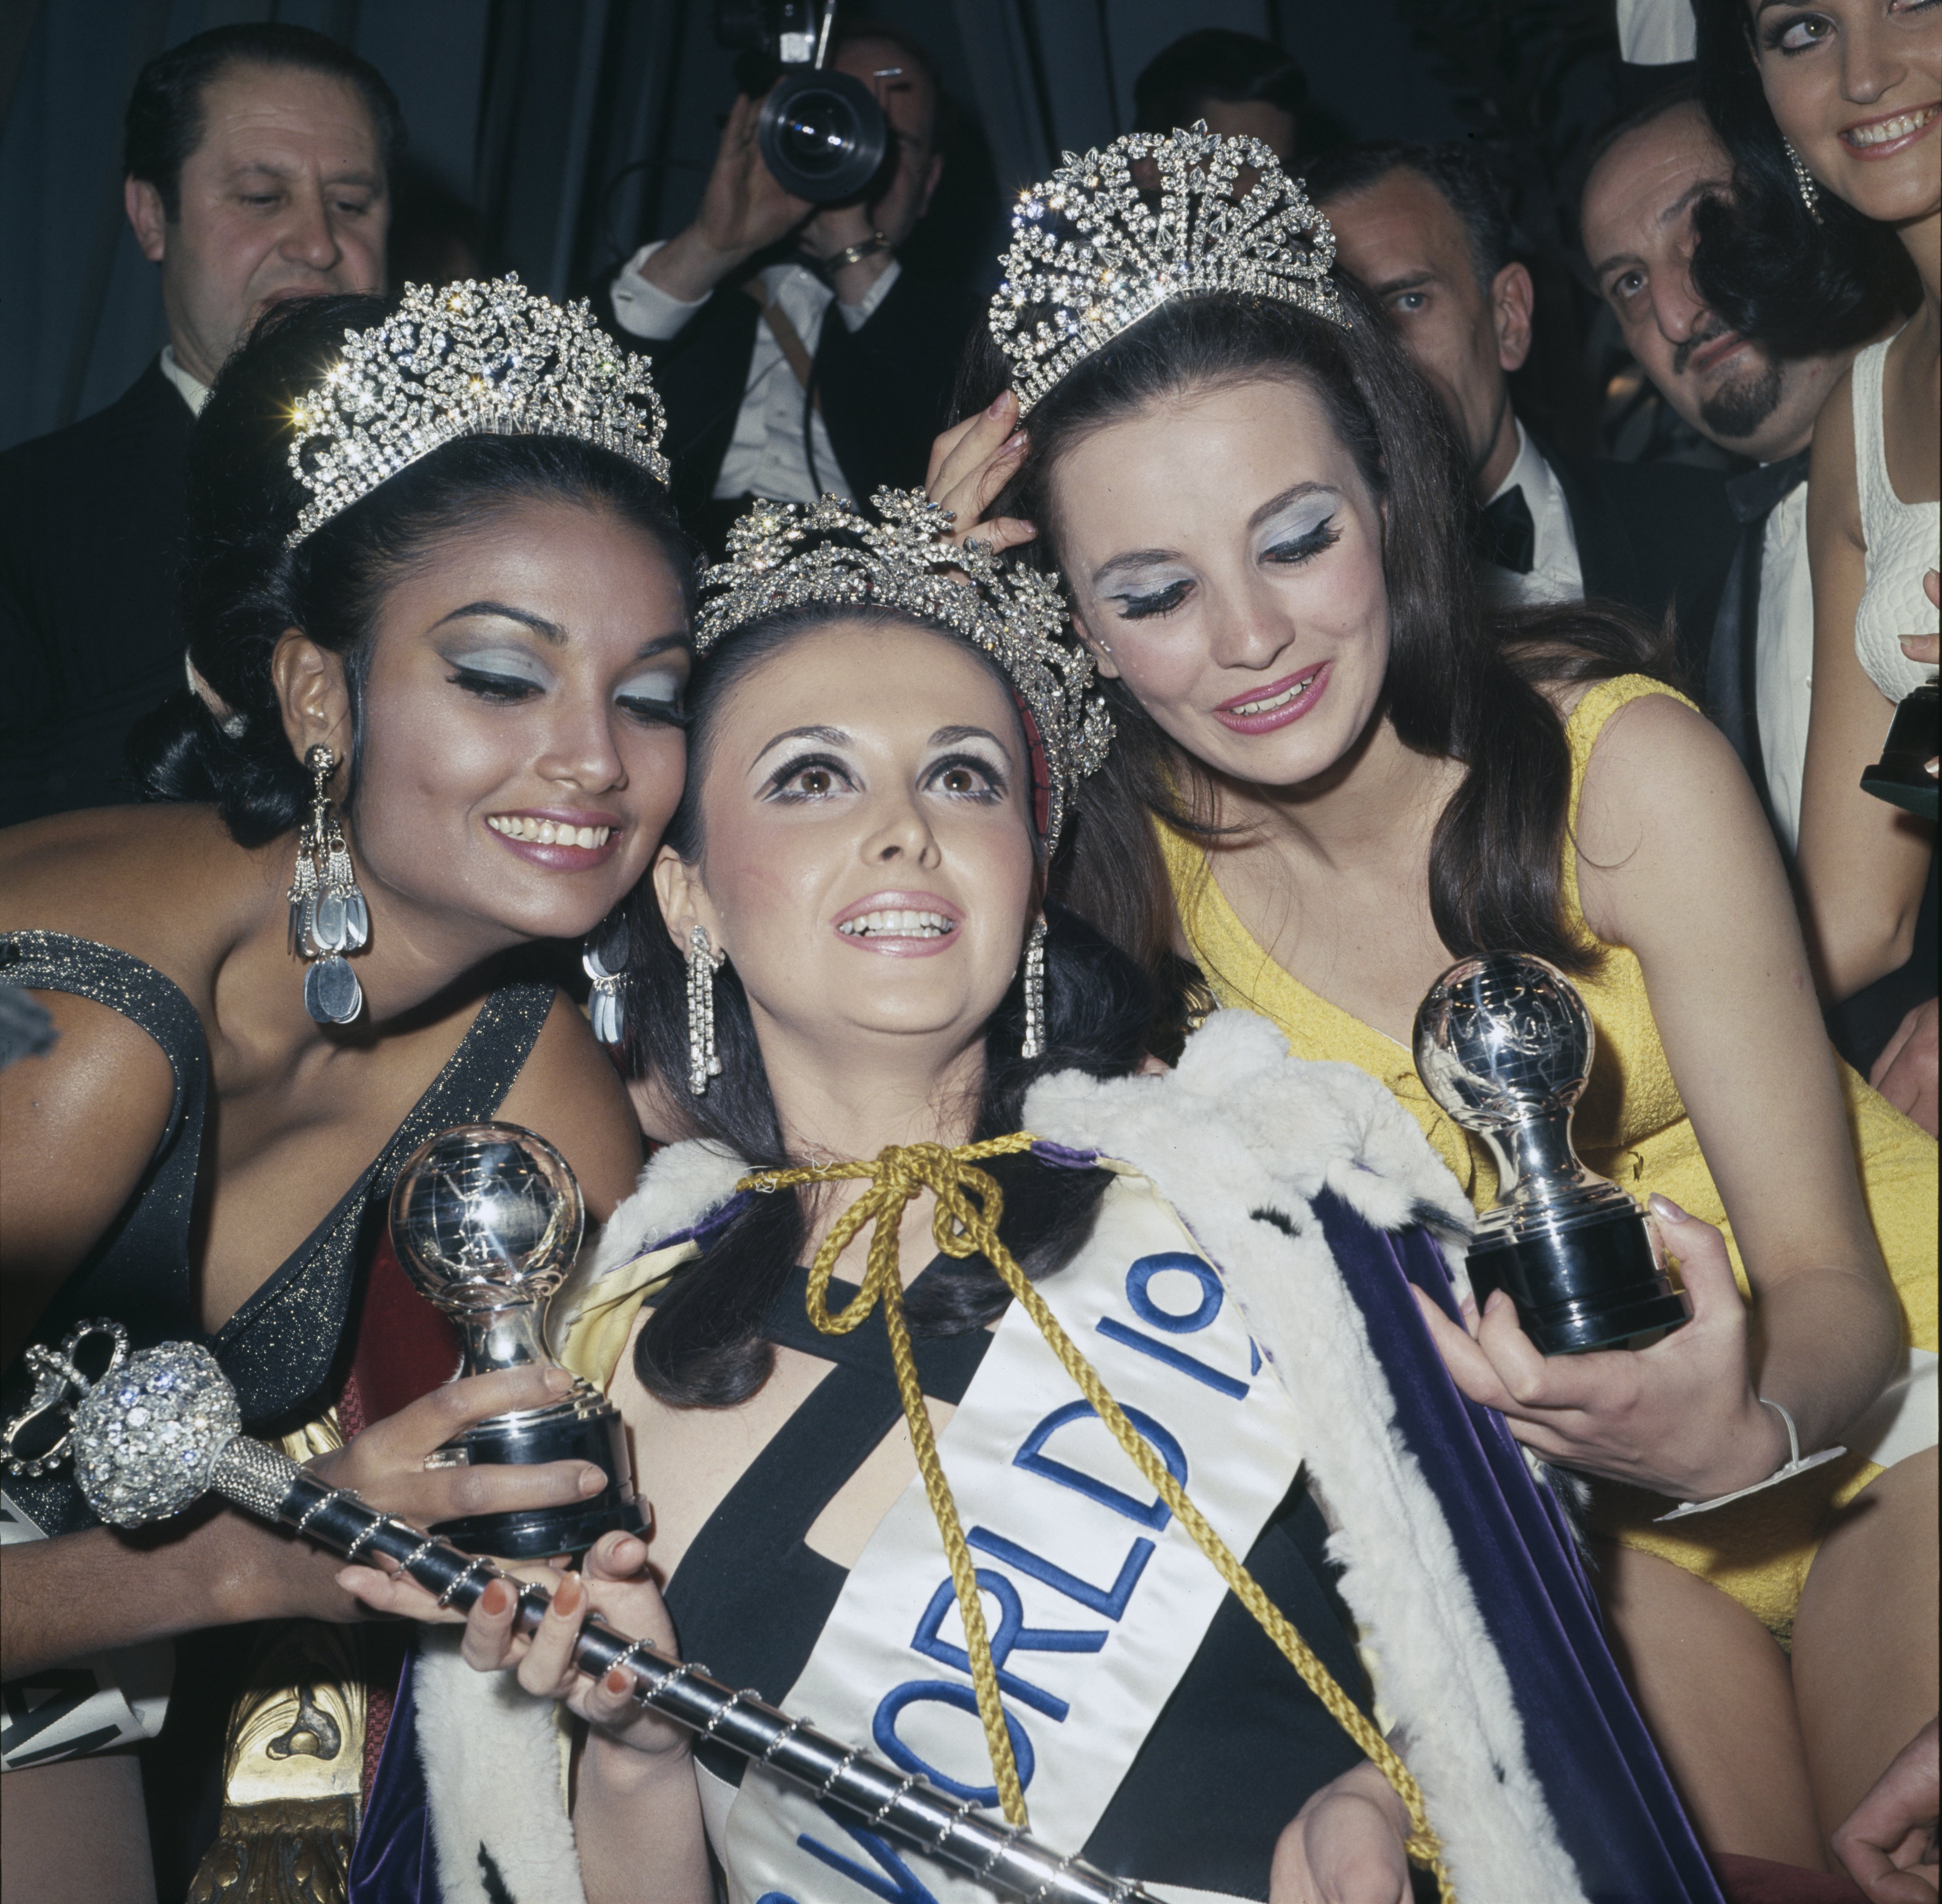 Pictured are the 1967 Miss World beauty pageant top three: Madeline Hartog-Bel of Peru (C) in first place, Maria del Carmen Sabaliauskas (R) in second place, and Shakira Baksh (L) in third place. The top three were pictured at the Lyceum Ballroom in London on 16th November 1967. | Source: Getty Images